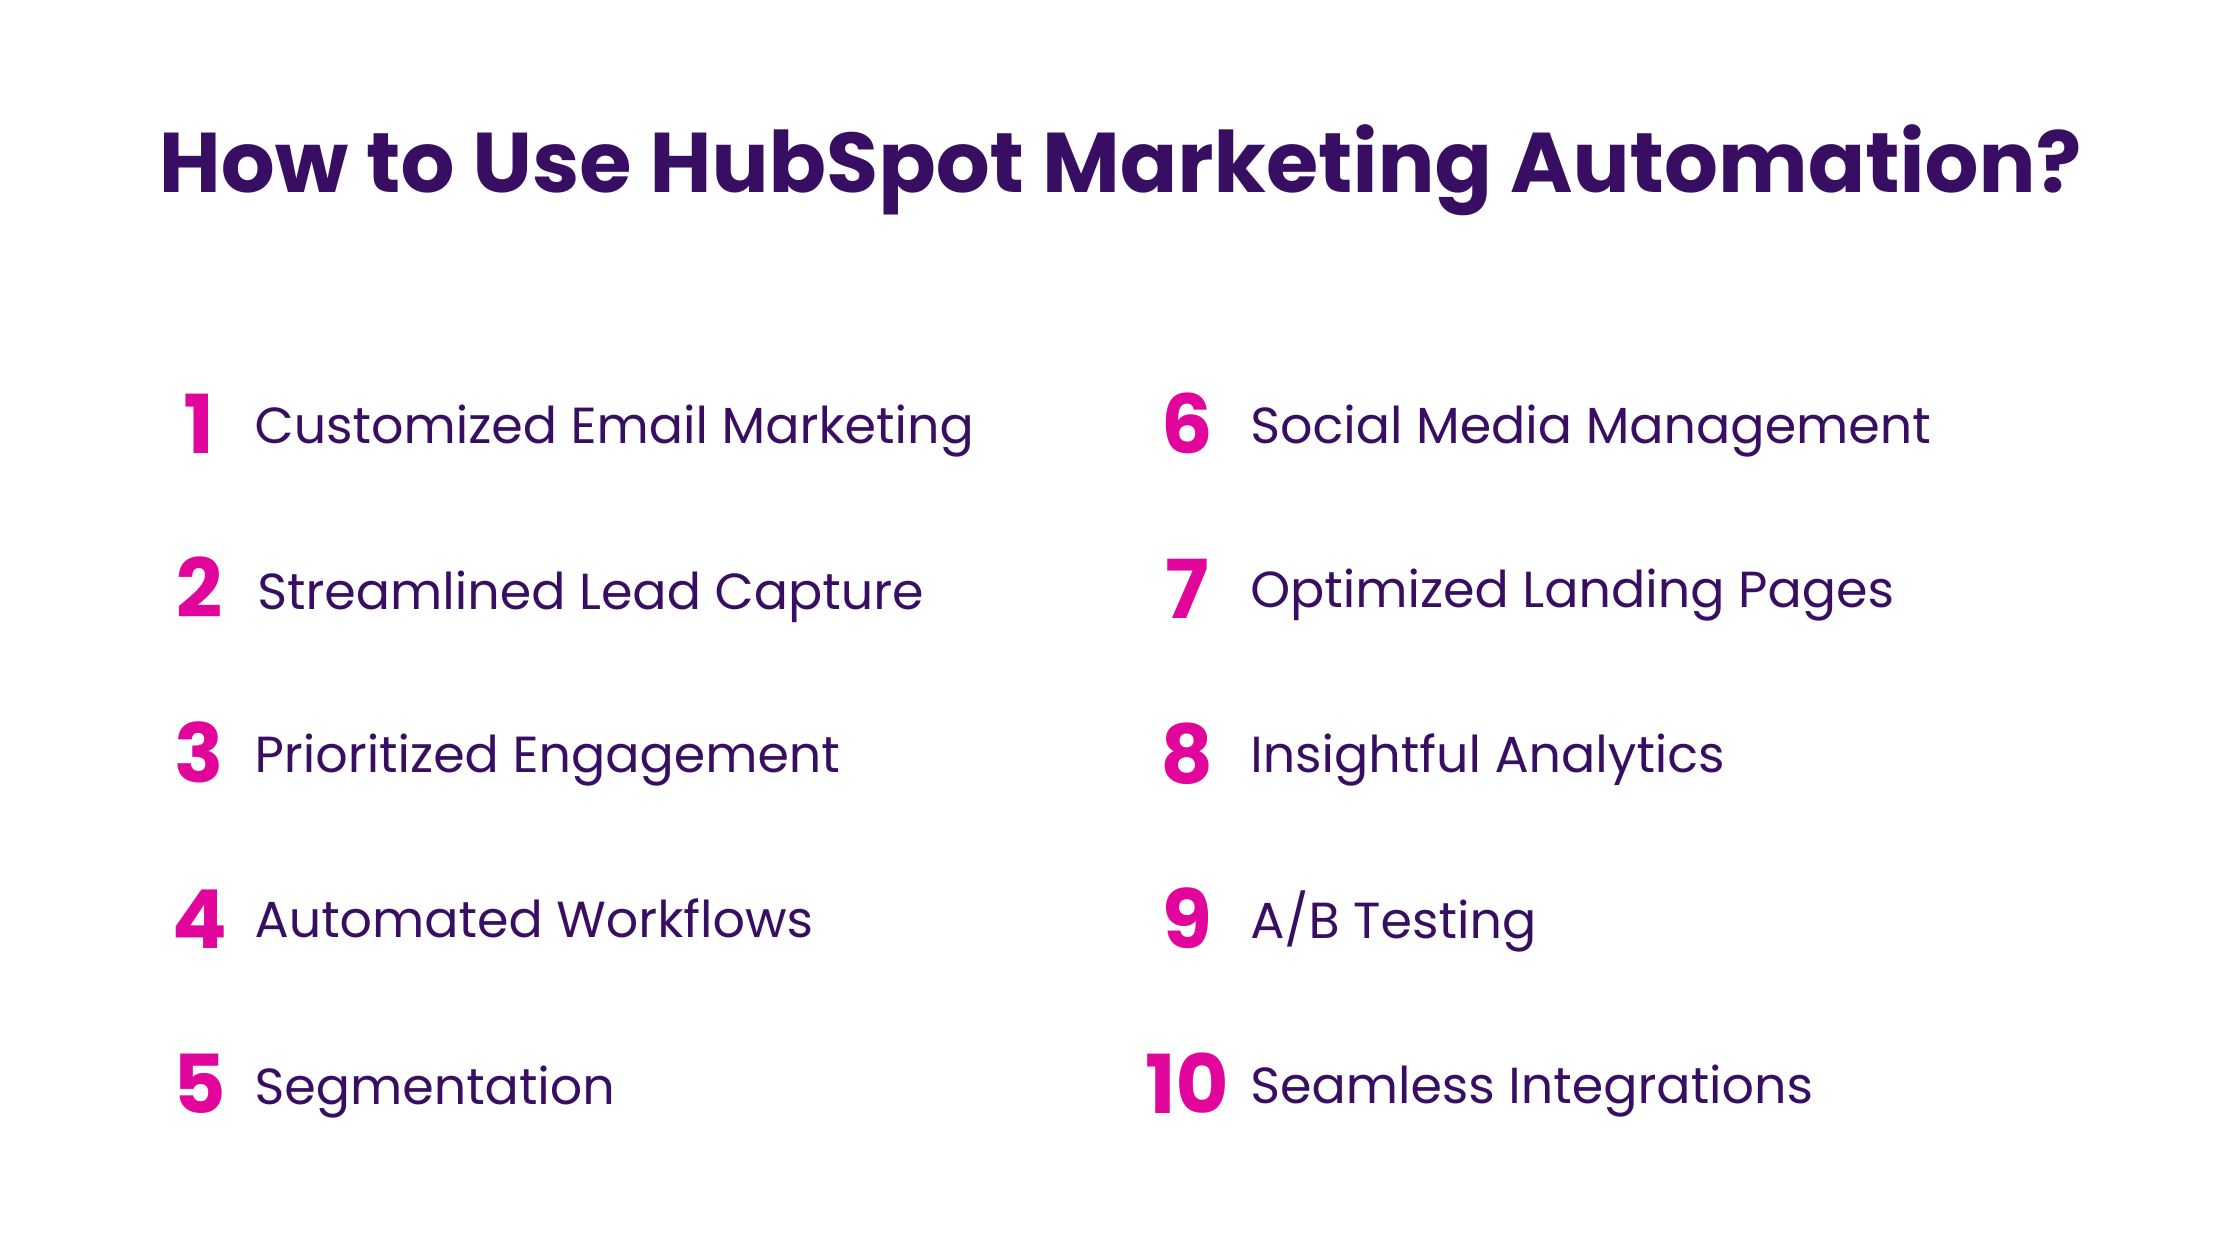 How to Use HubSpot Marketing Automation